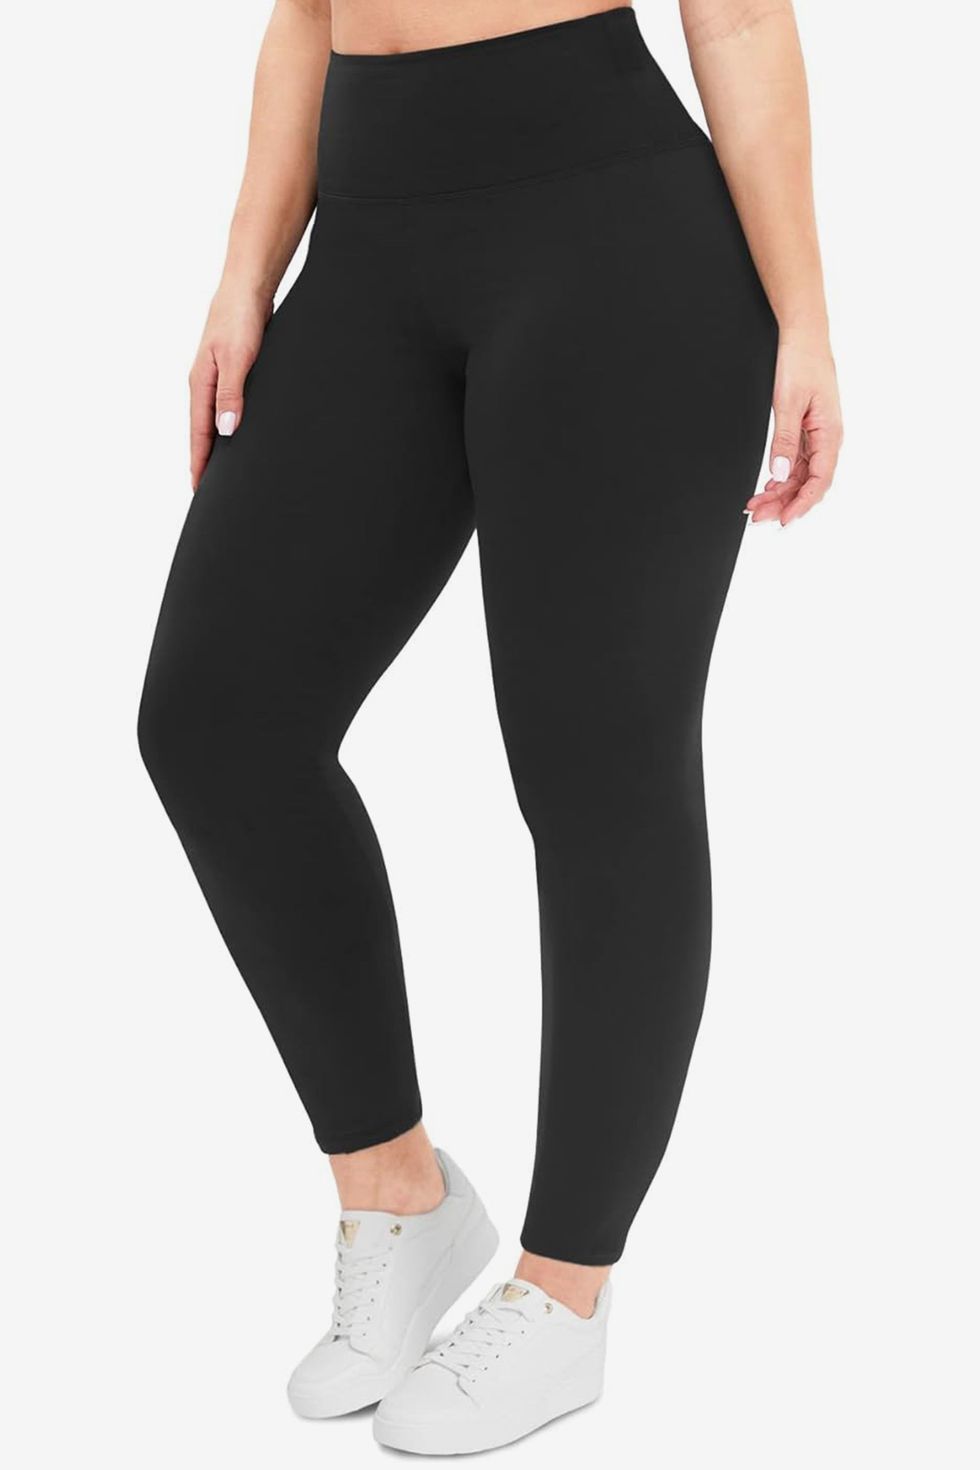 NexiEpoch 4 Pack Leggings for Women with Pockets- High Waisted